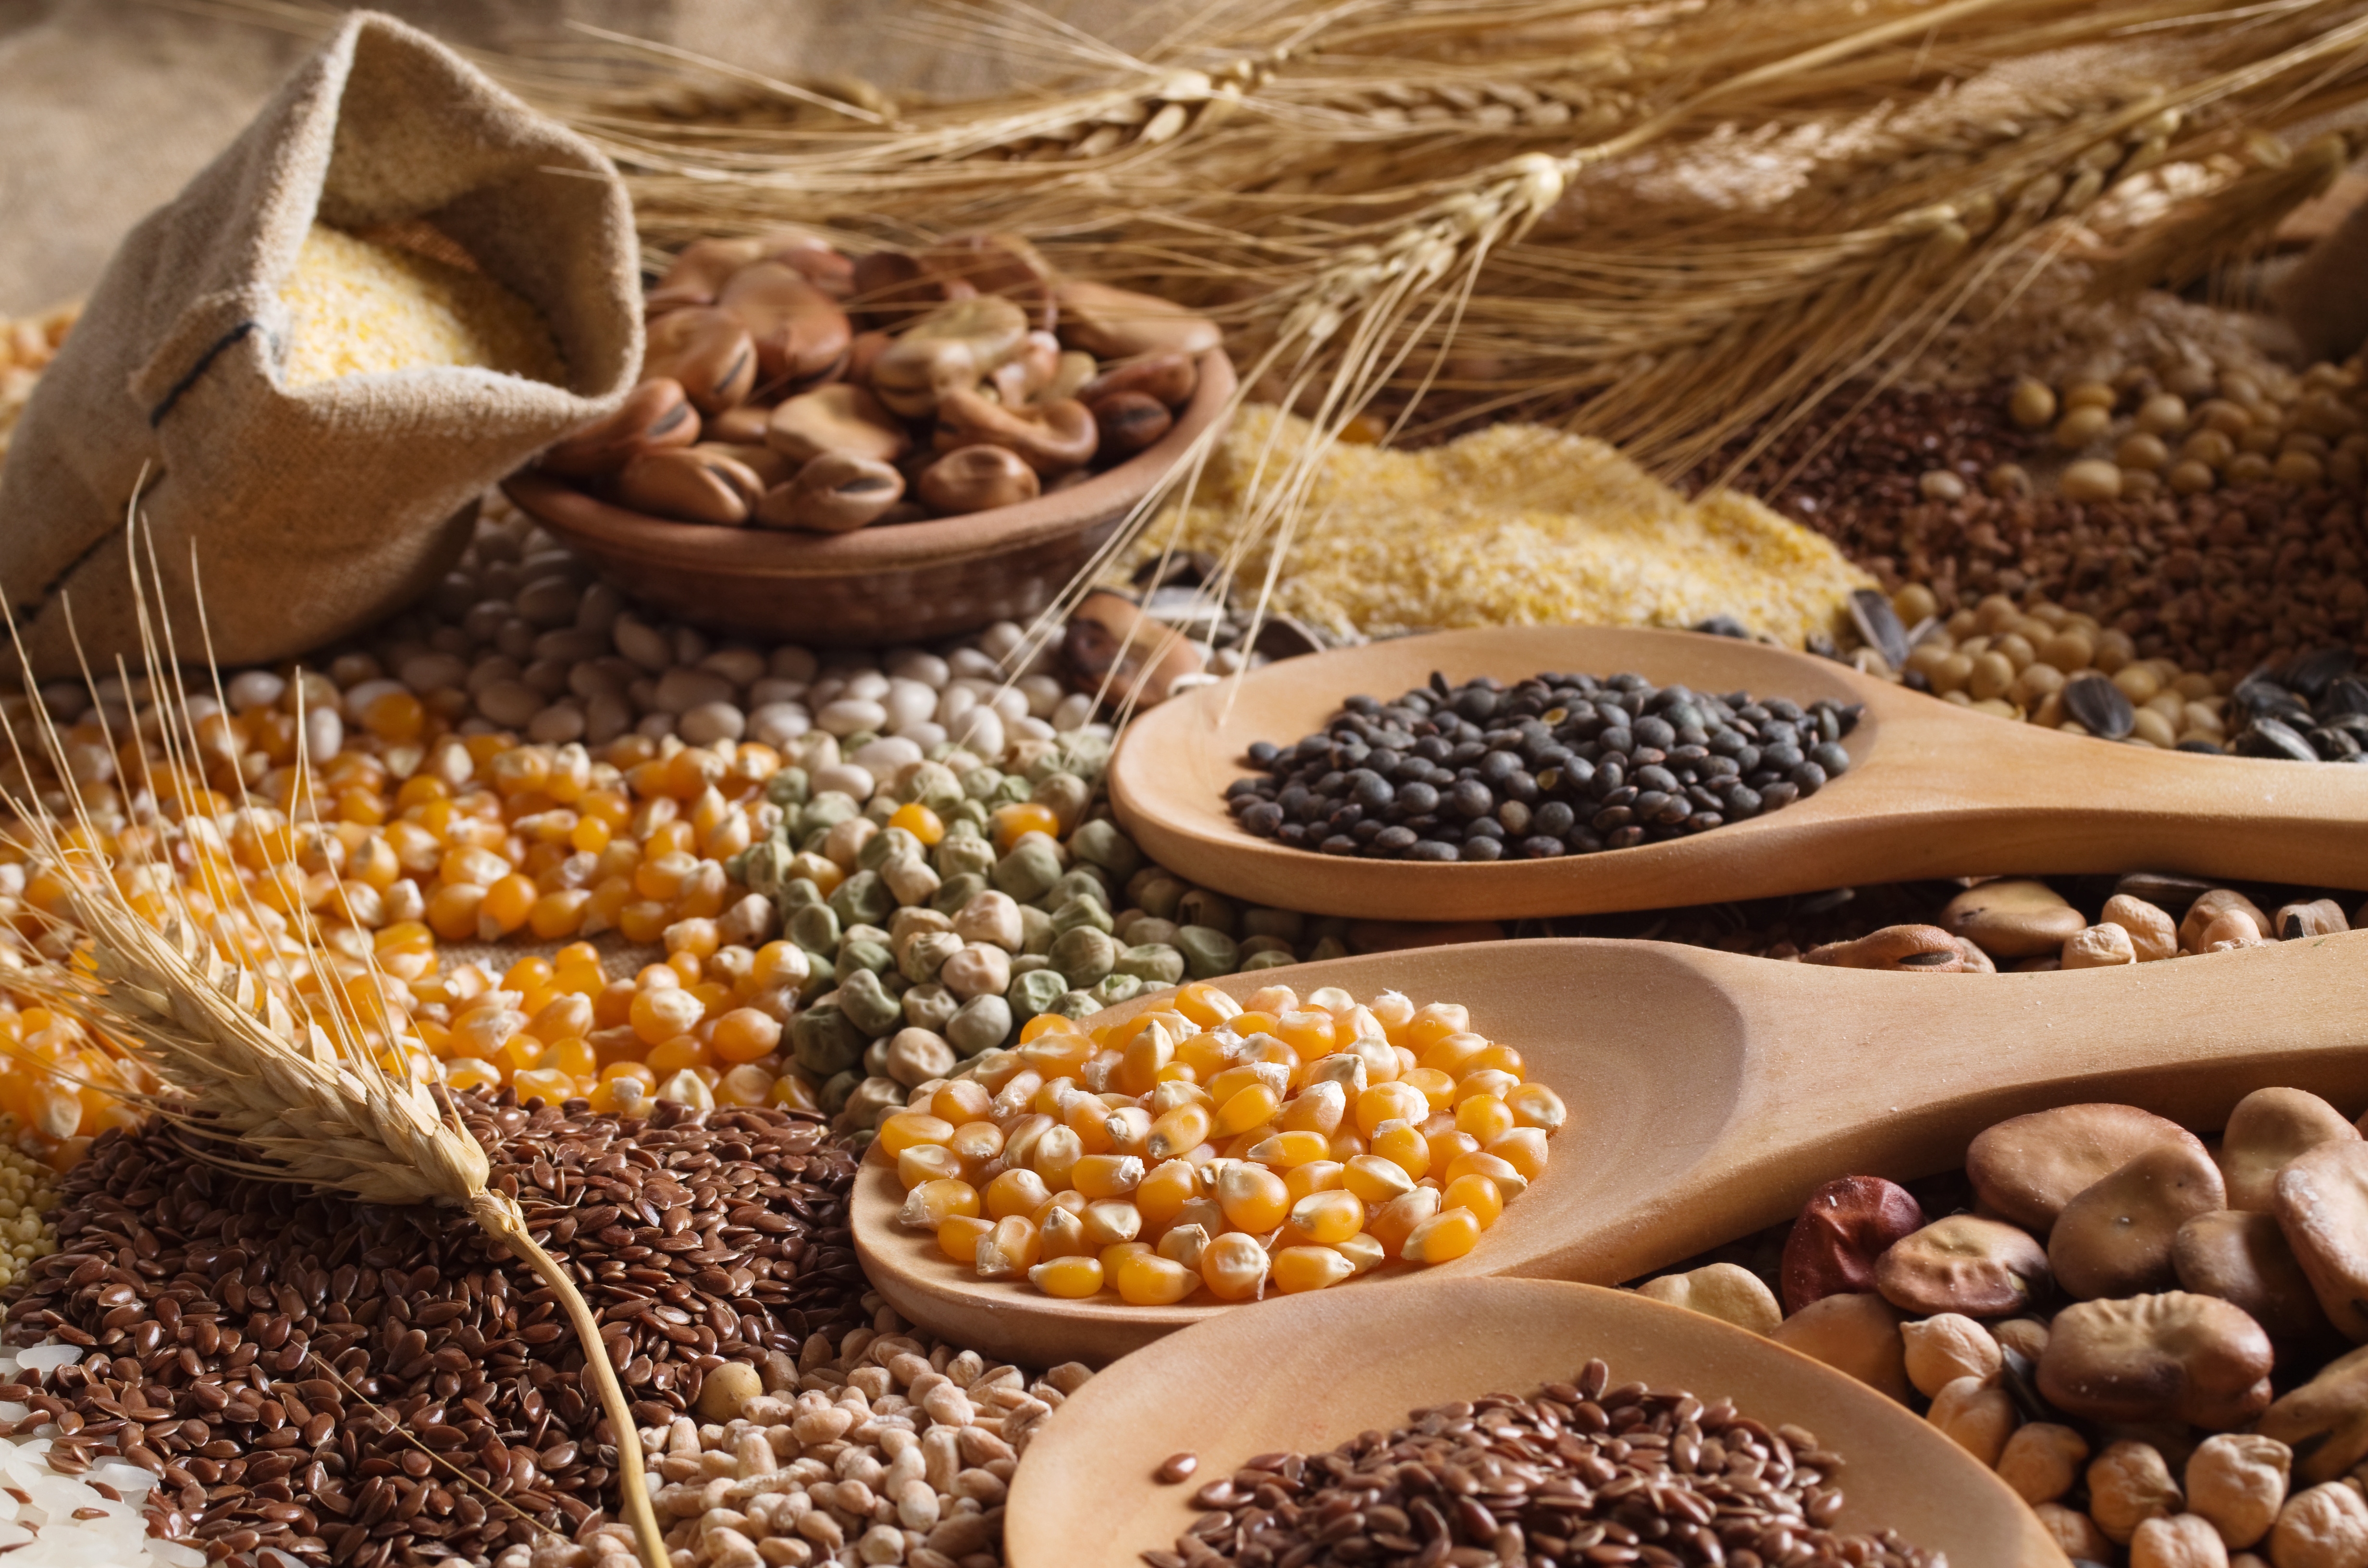 Grains, oilseeds, biofuels and plant proteins